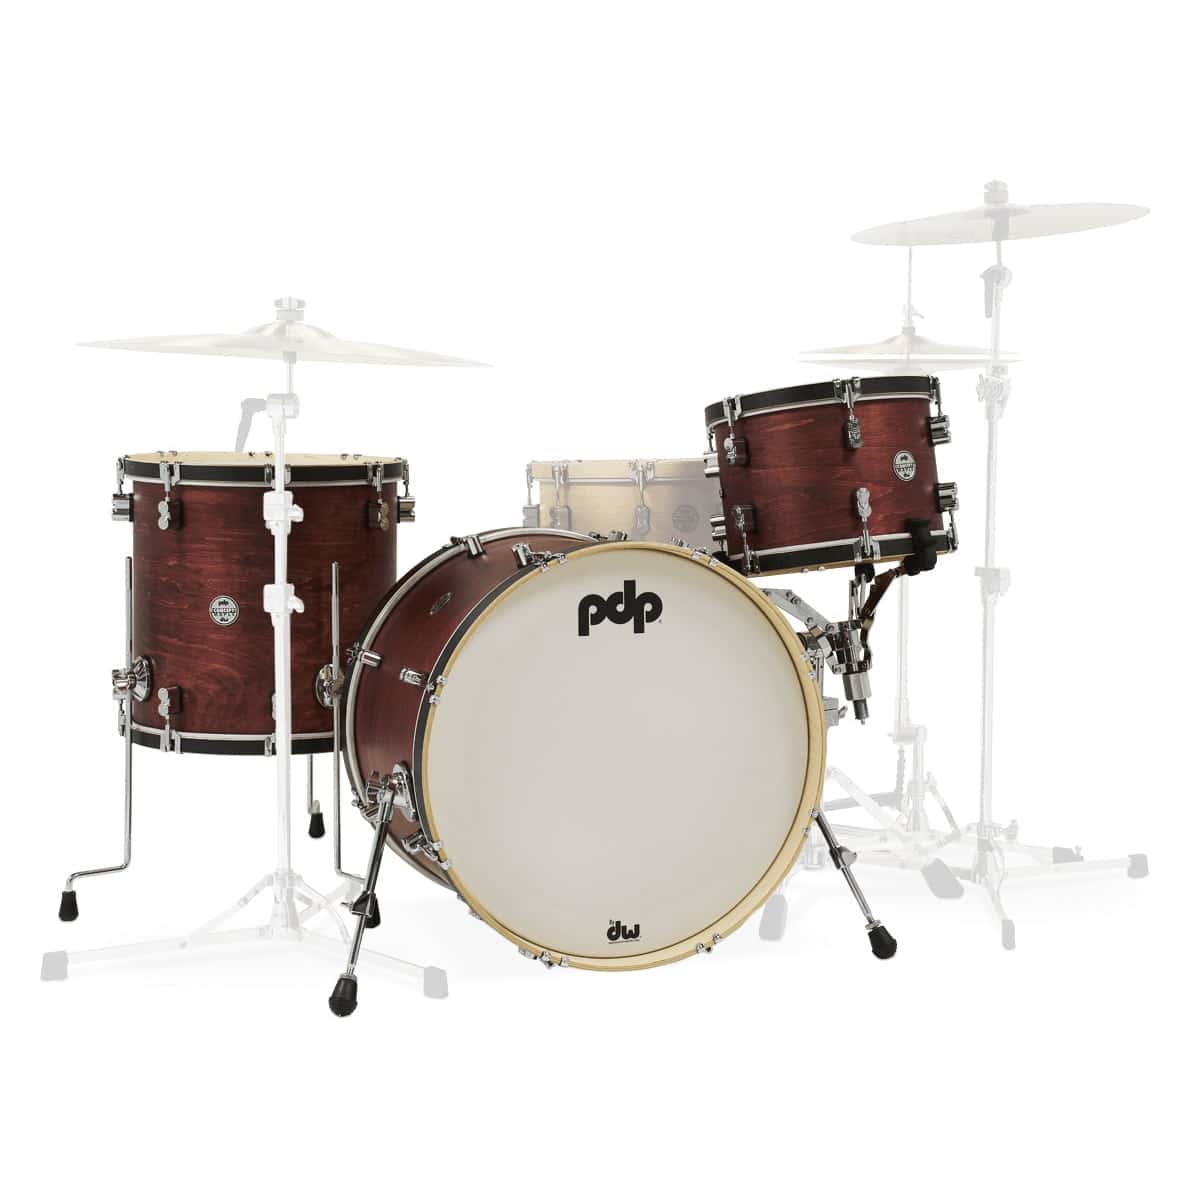 PDP BY DW CONCEPT CLASSIC WOOD HOOP 3 SHELLS 22,13,16 OX BLOOD STAIN - PDCC2213OB